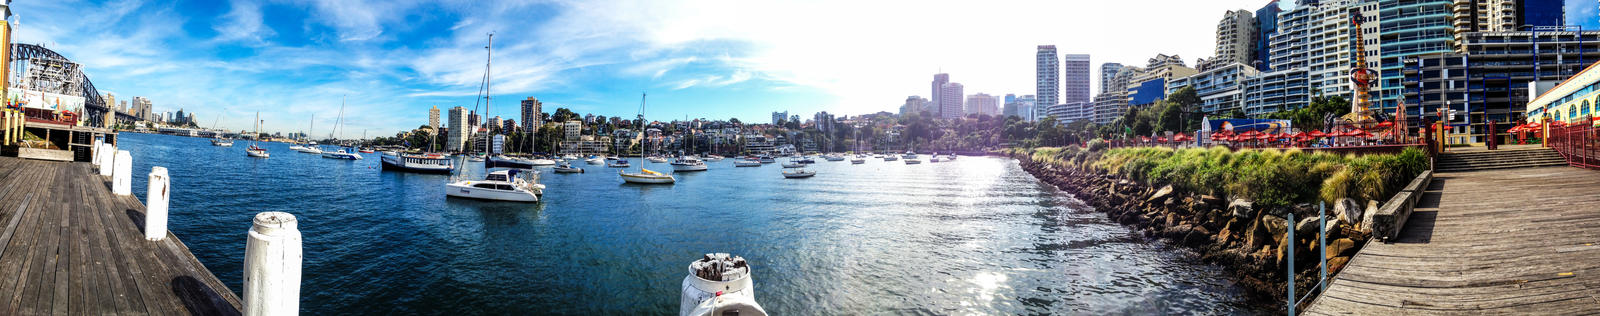 Panorama of Lavender Bay from Luna Park Sydney